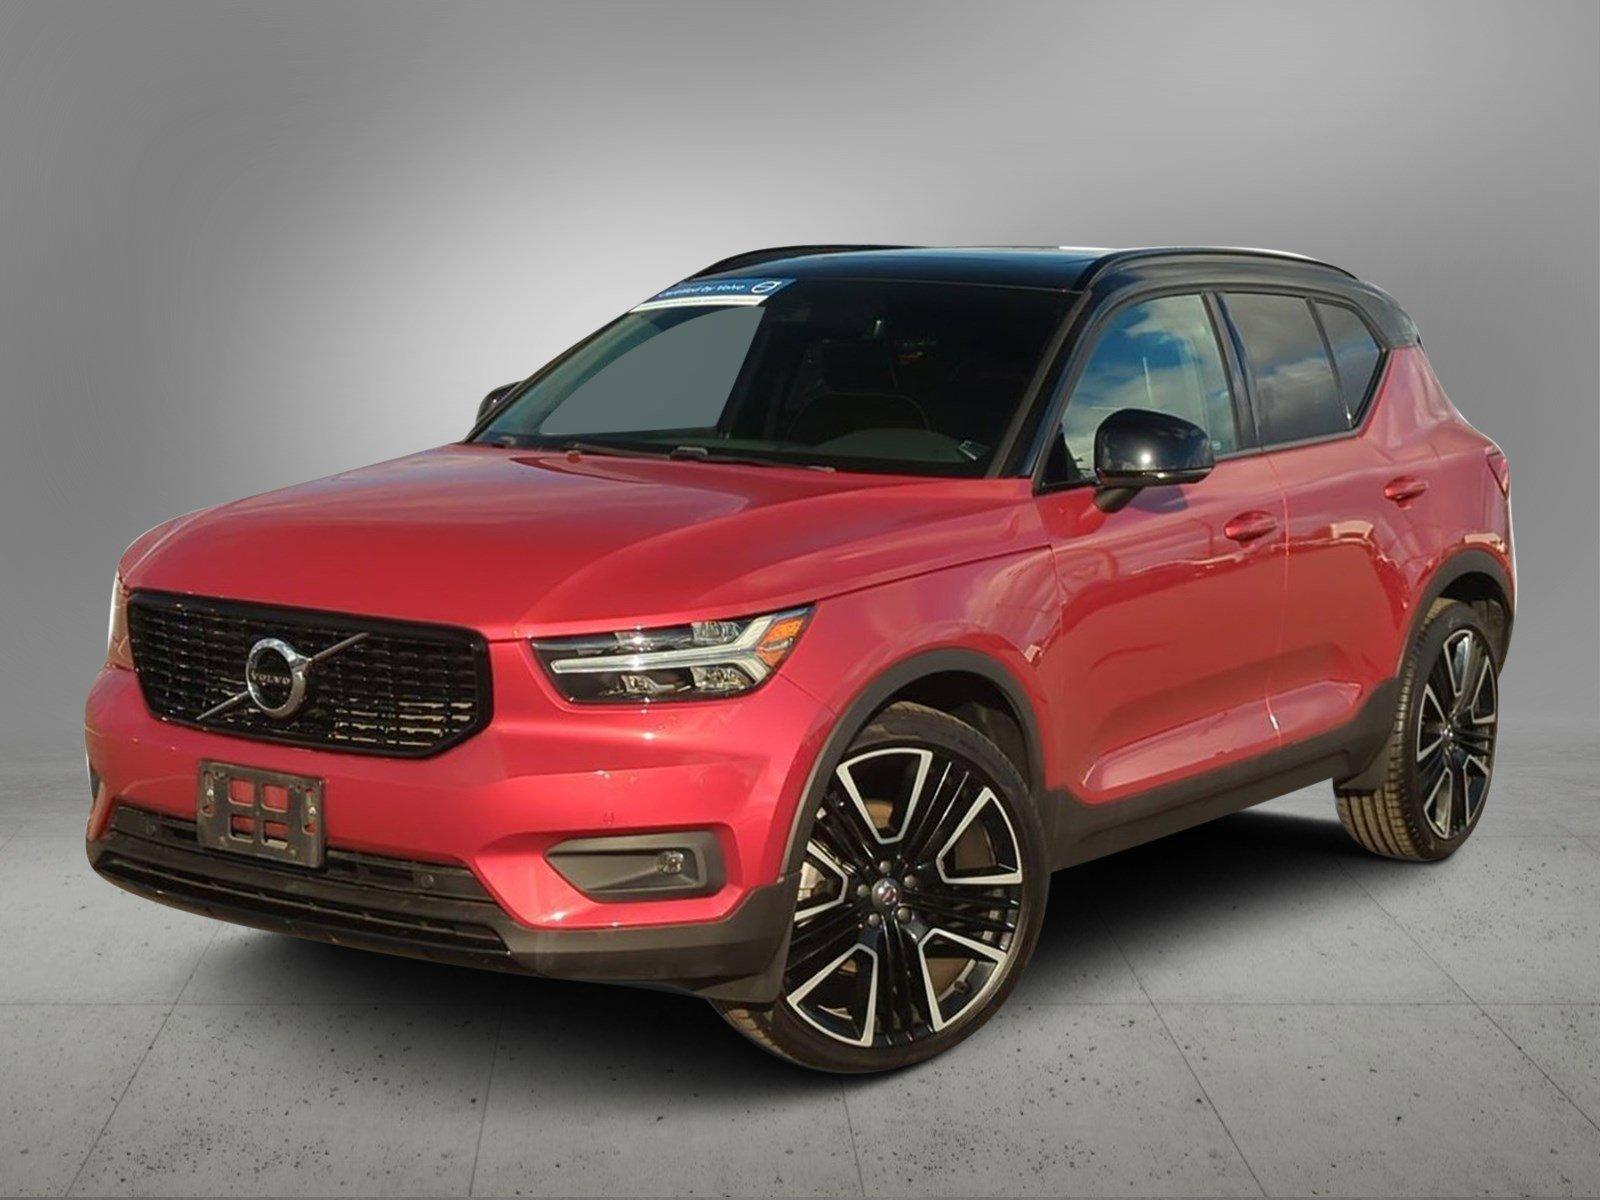 Pre-Owned 2020 Volvo XC40 T5 AWD R-Design Sport Utility in Troy #CV4948 |  Suburban INFINITI of Troy